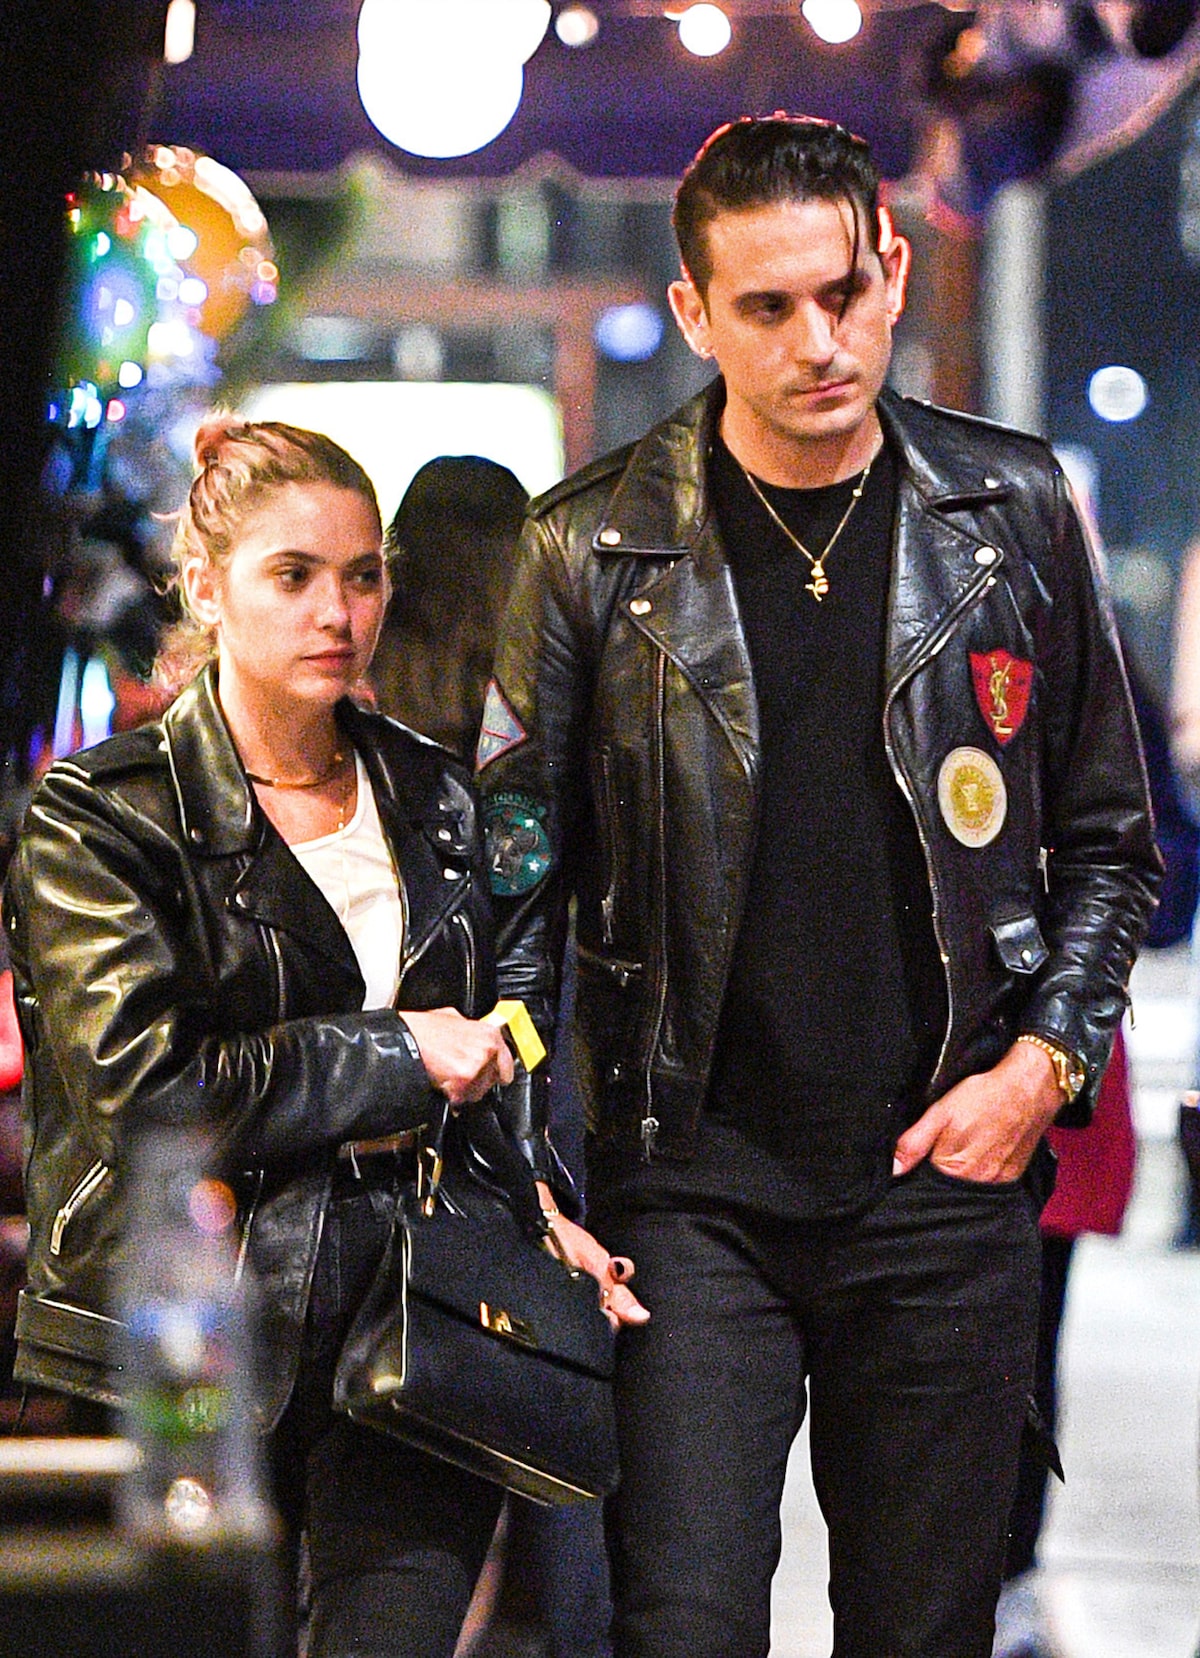 Has G-Eazy Already Moved on from Ashley Benson?